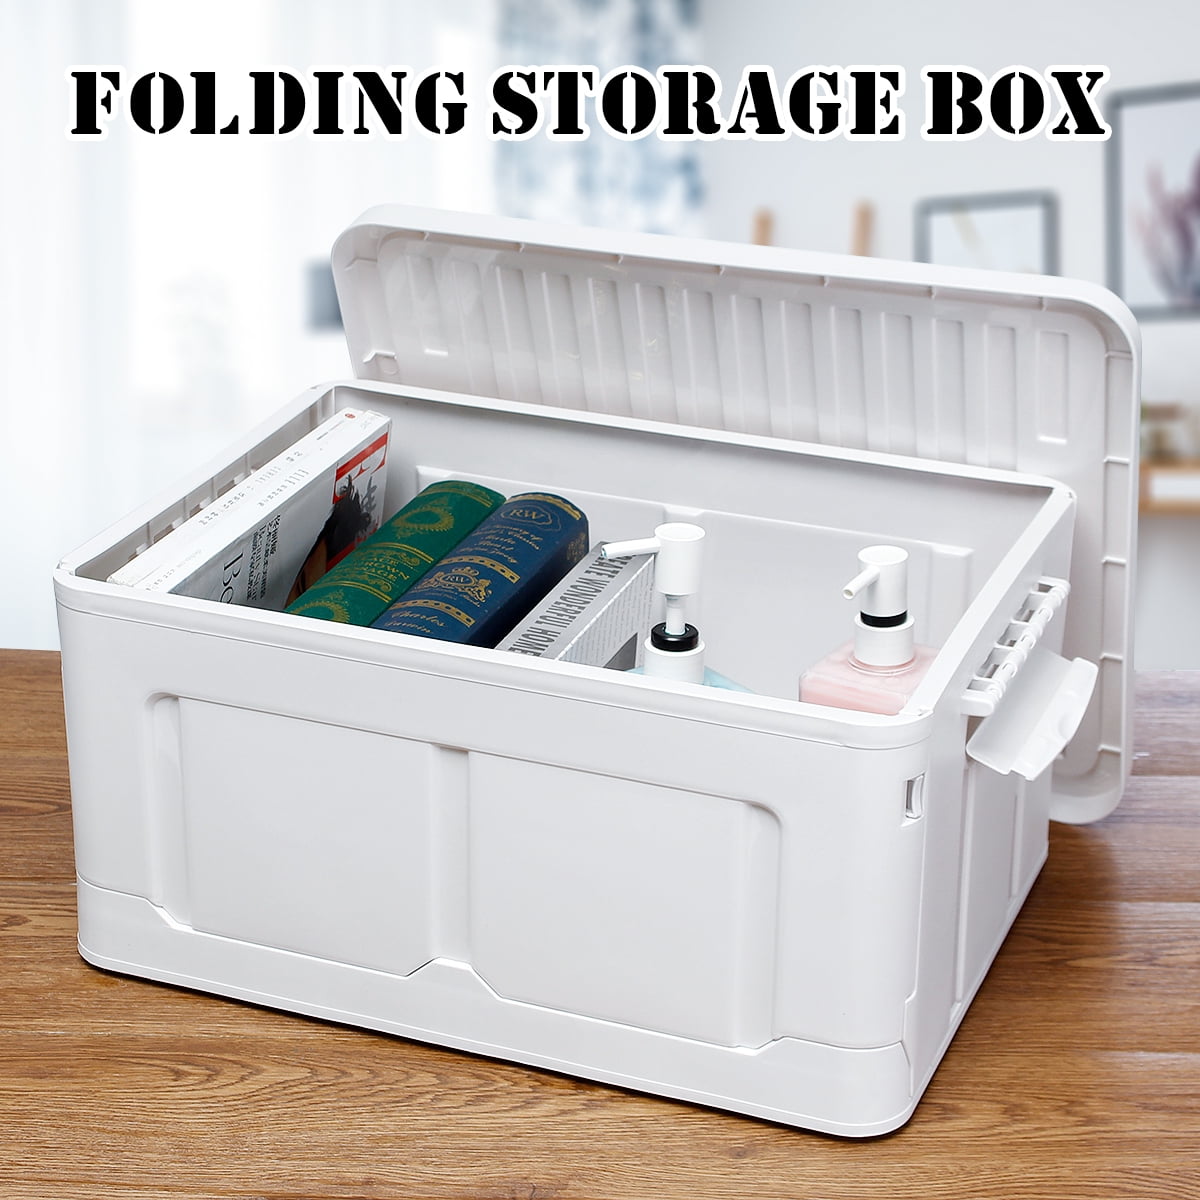 Lidded Storage Bins 55 L,Collapsible Storage Box Crates Plastic Tote Storage Box Container Stackable Folding Utility Crates for Clothes Books,Snack Toy white Shoe and Grocery Storage Bin 